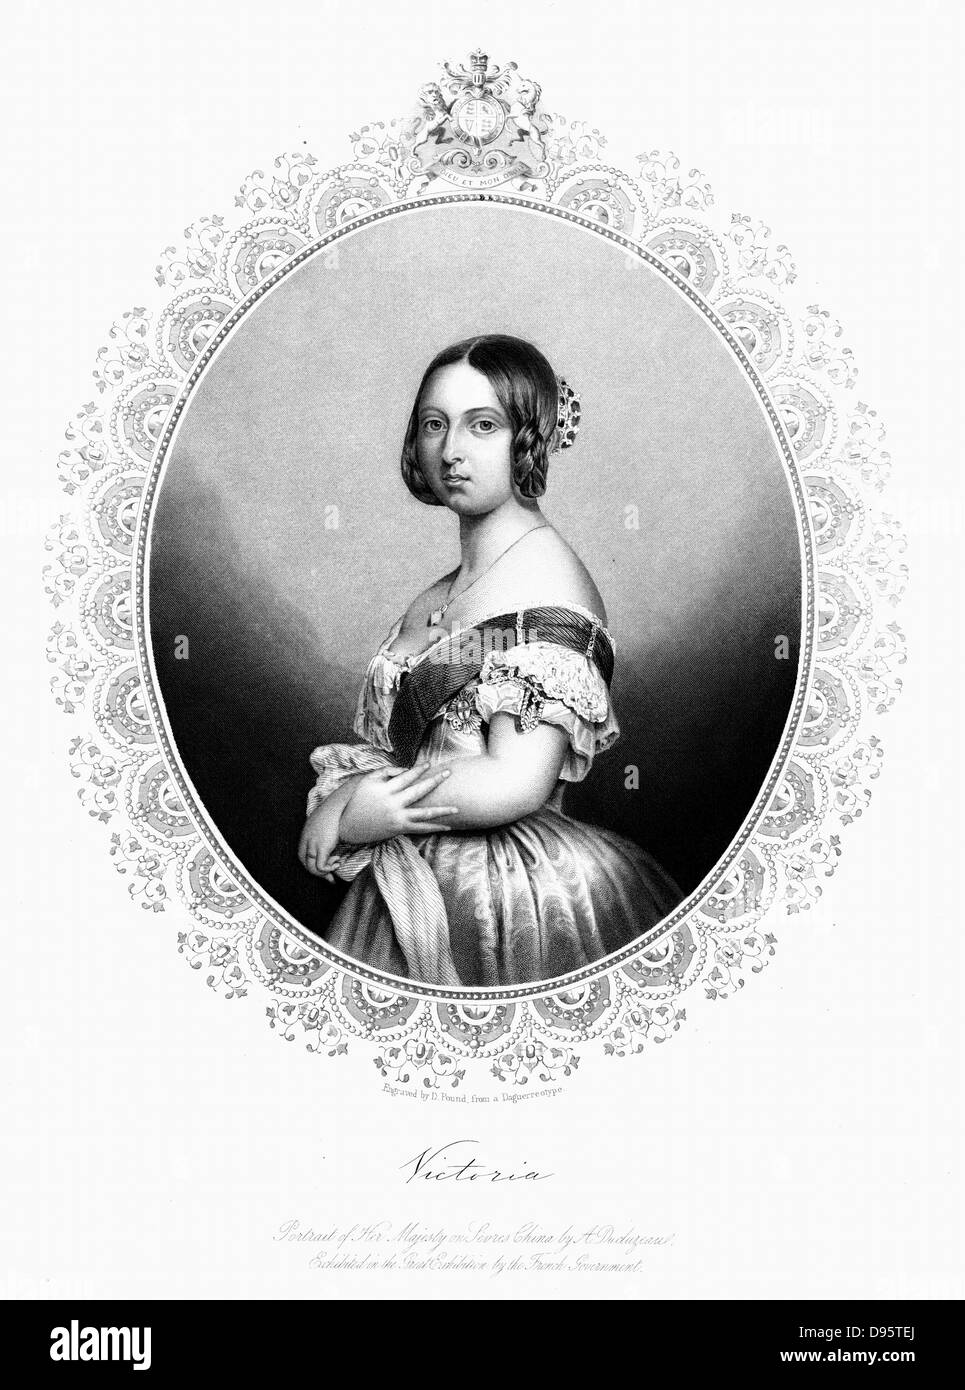 Victoria (1819-1901) Queen of Great Britain and Ireland from 1838. Victoria c1850. Engraving. Stock Photo